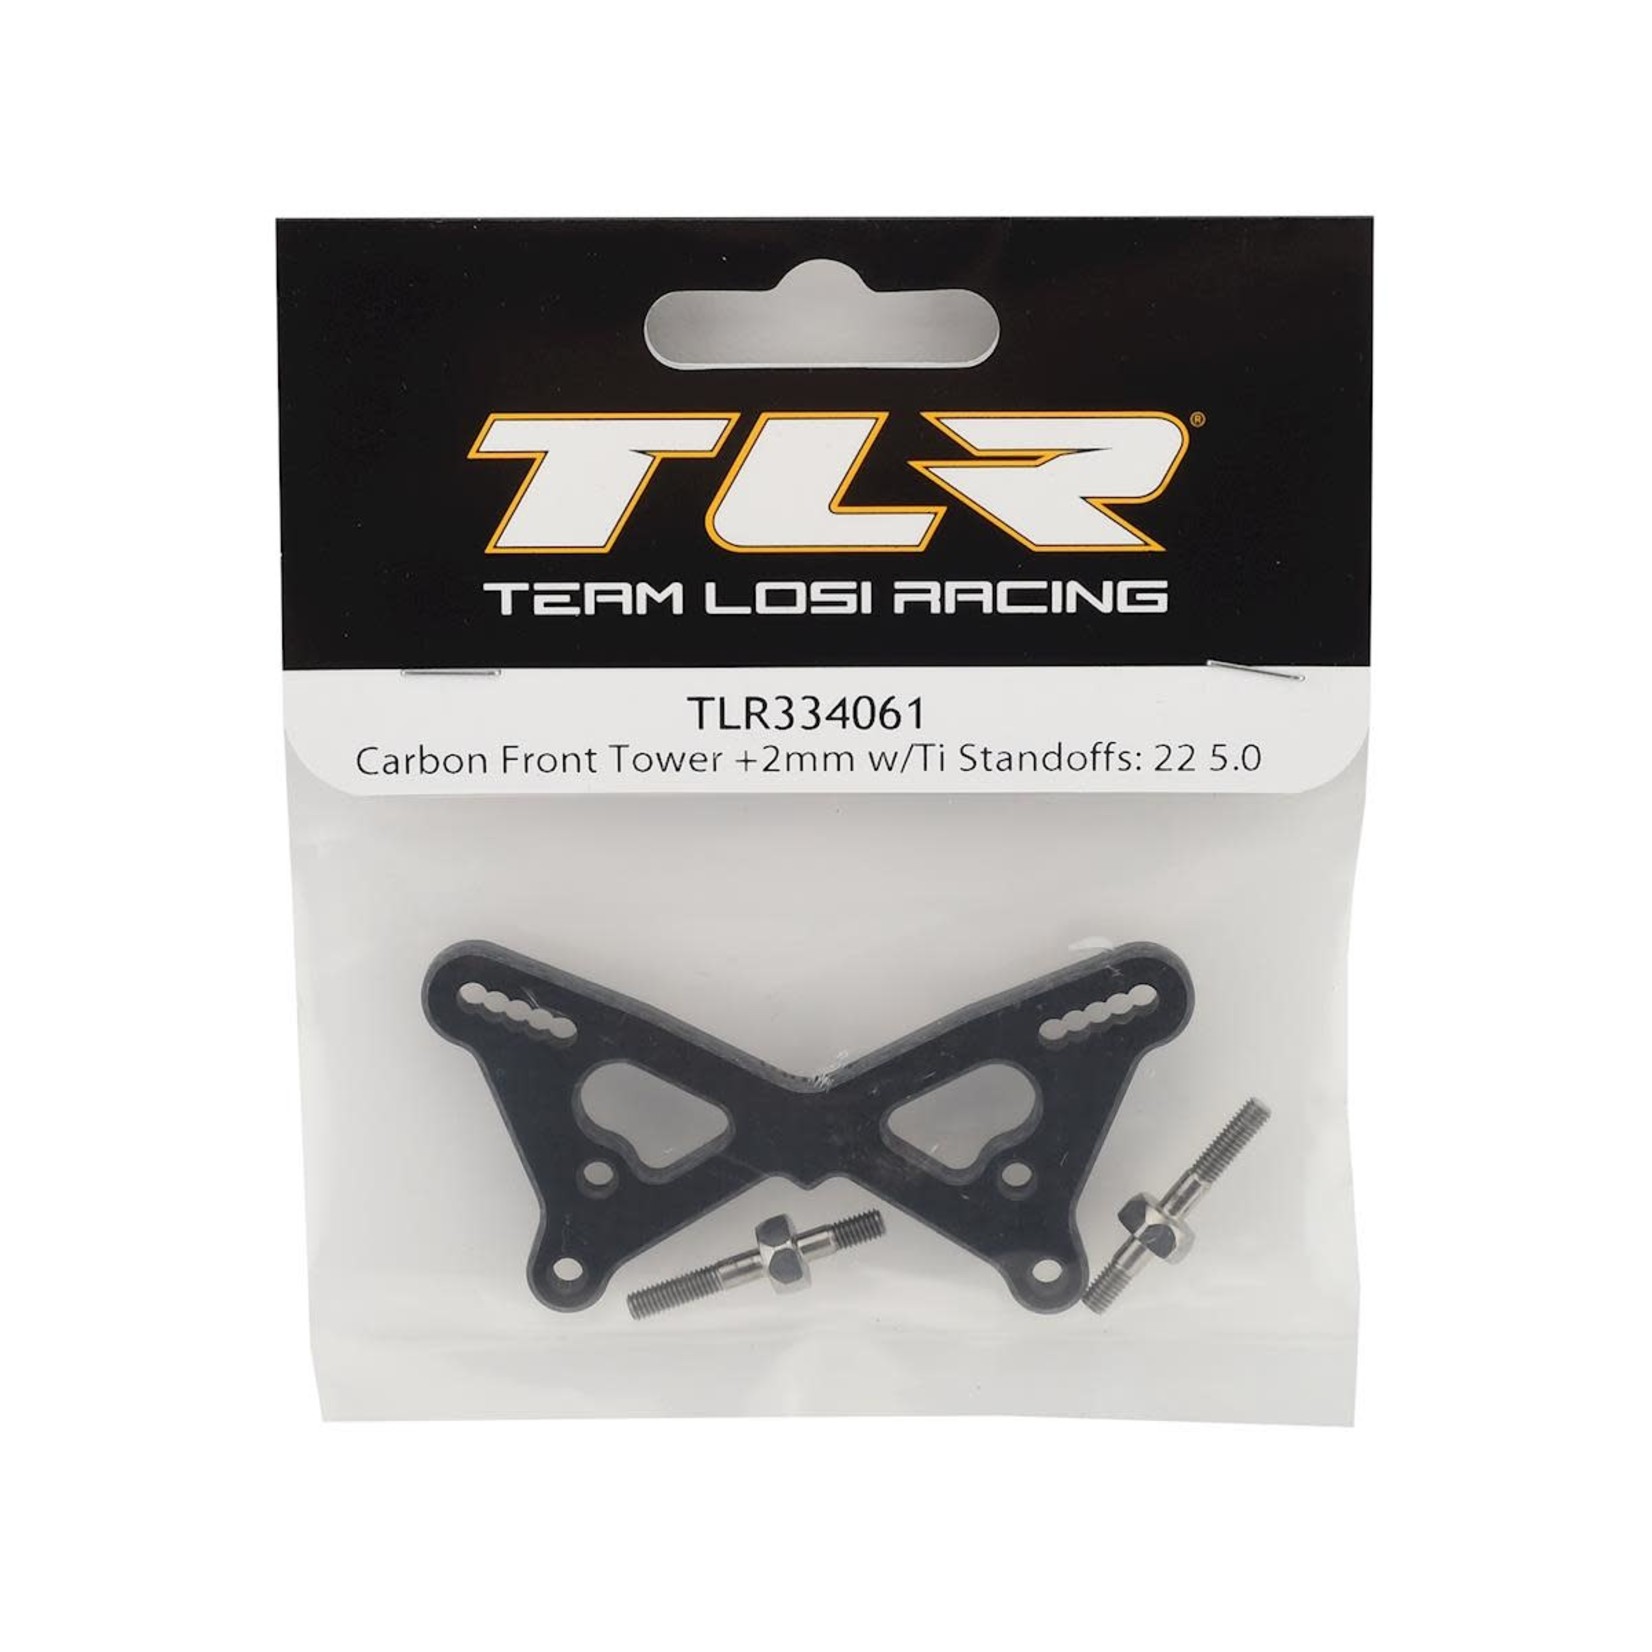 TLR Team Losi Racing 22 5.0 +2mm Carbon Front Tower w/Titanium Standoffs #TLR334061